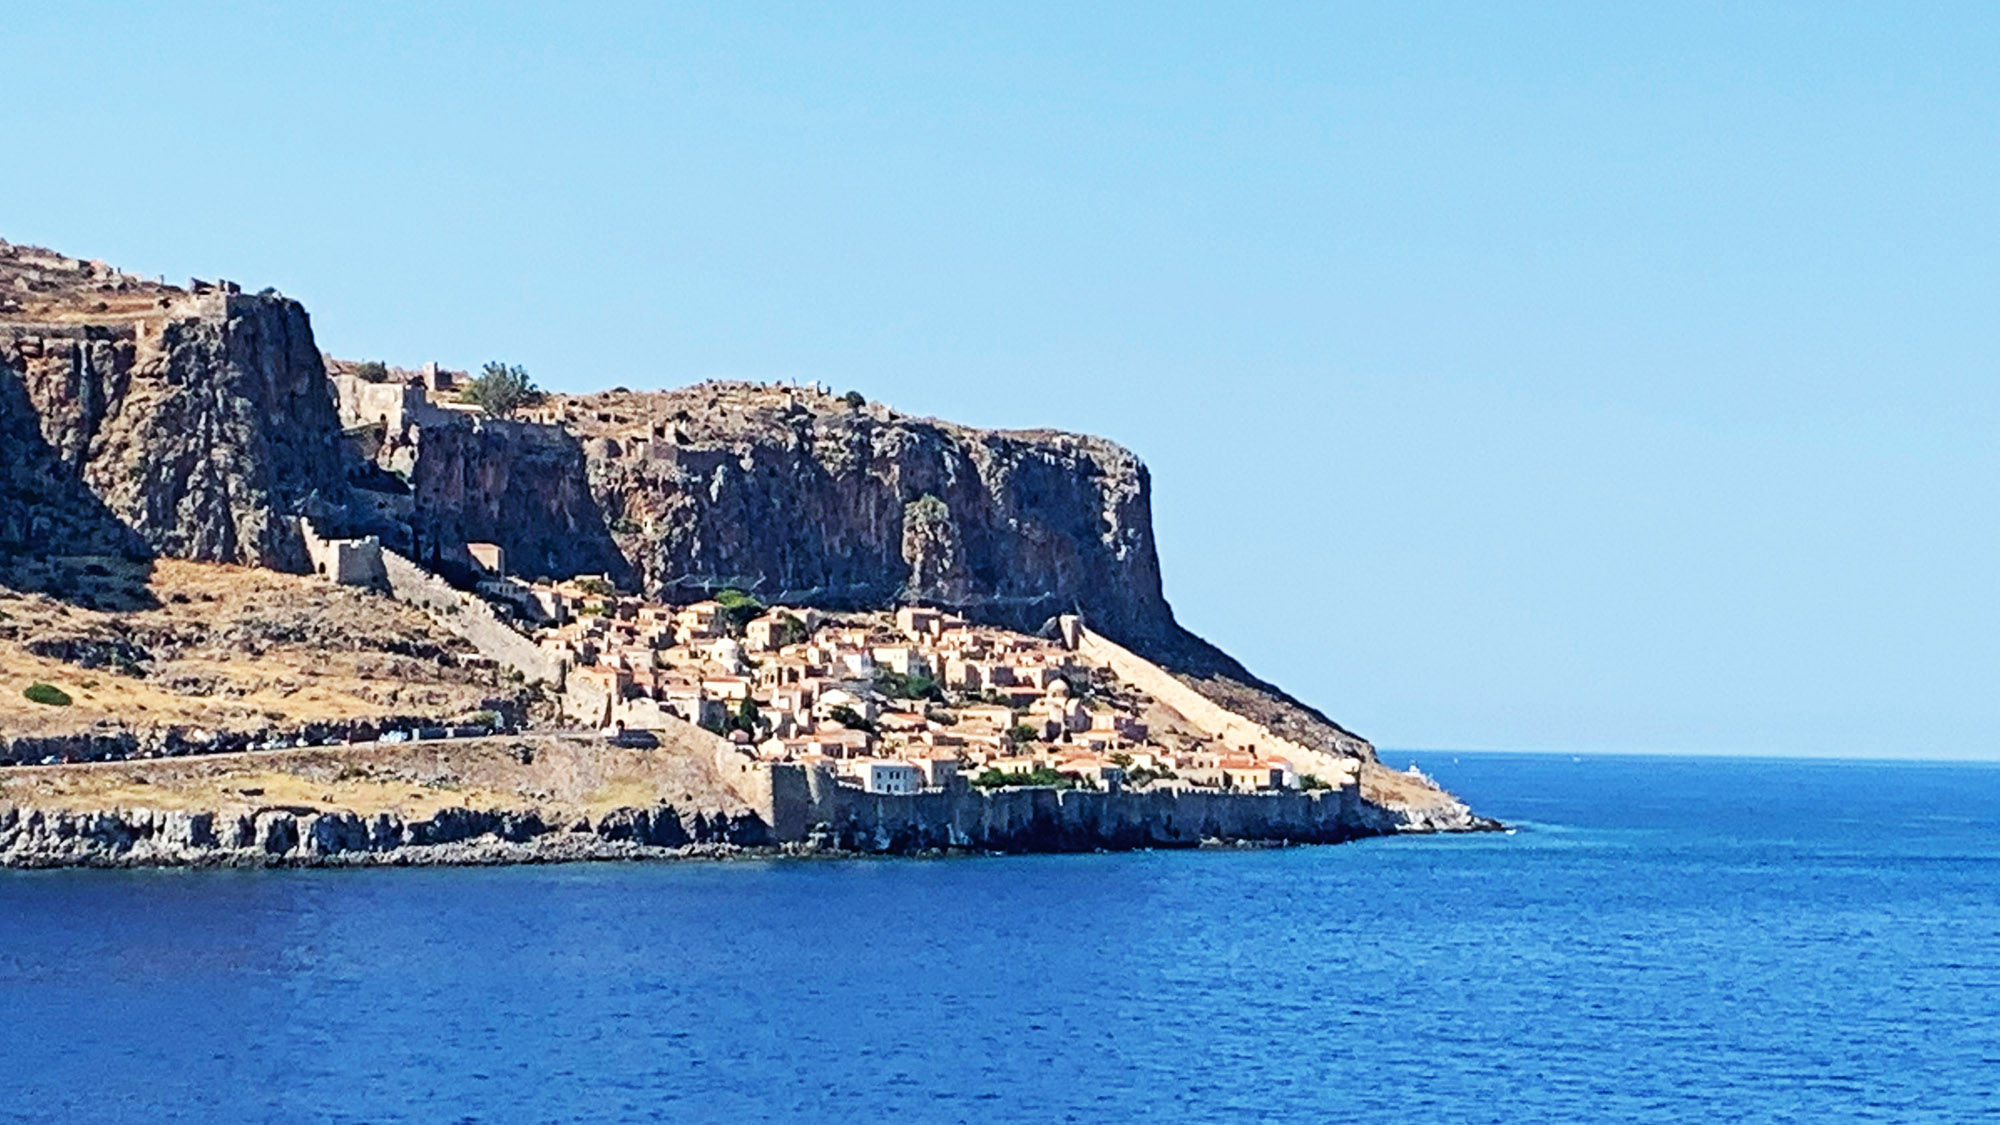 The ancient village of Monemvasia, Greece, as seen from the Seabourn Encore.